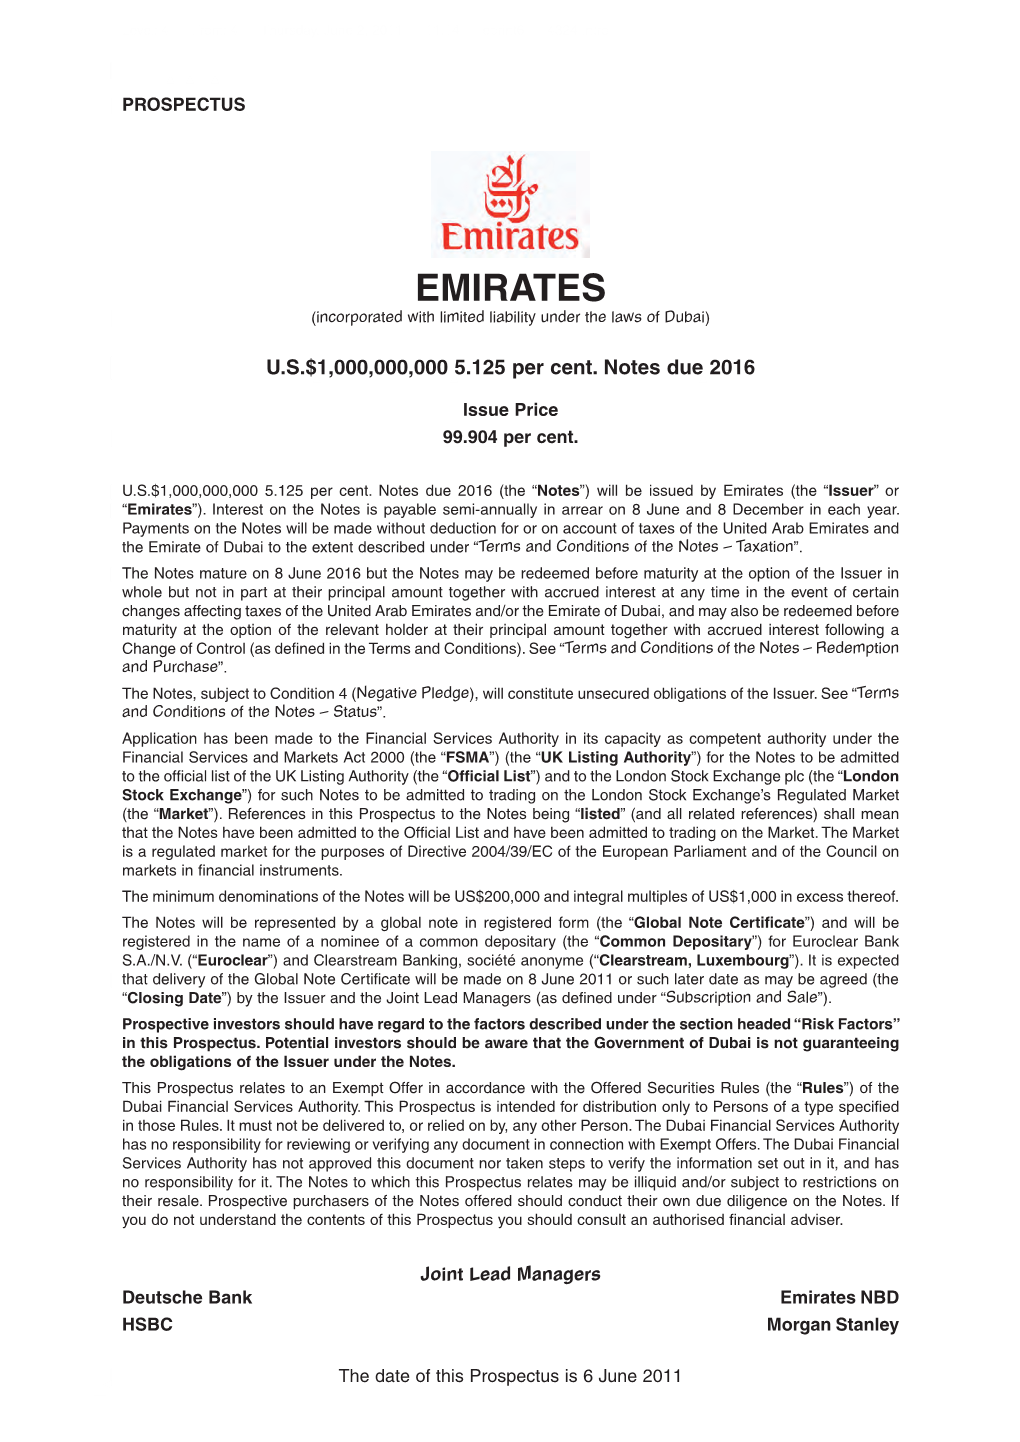 EMIRATES (Incorporated with Limited Liability Under the Laws of Dubai)